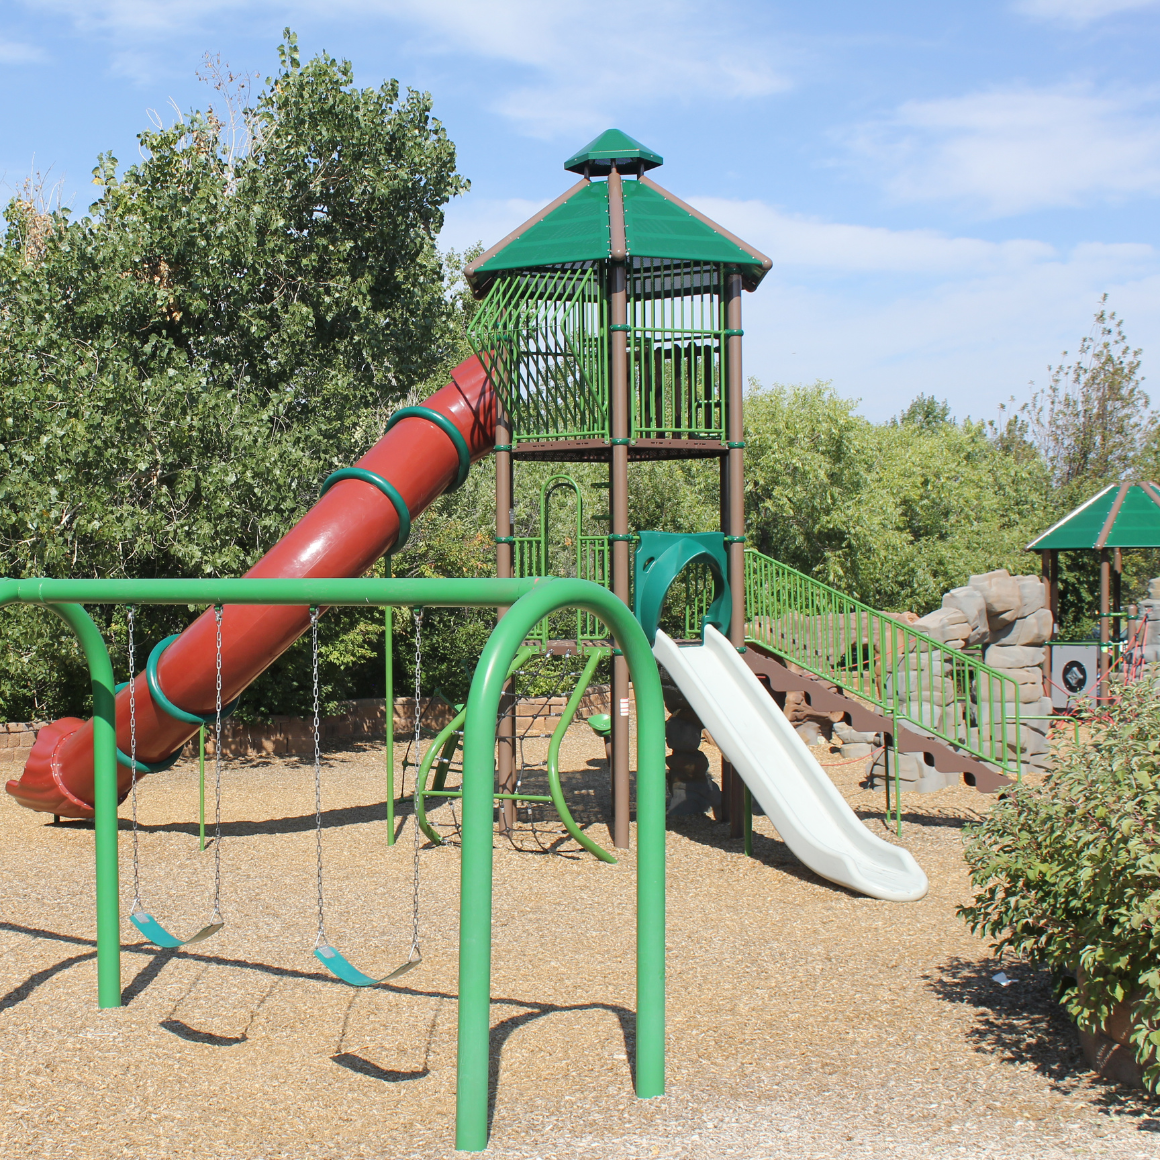 Piney Creek Hollow Park | 3 story playground structure, slides, and swingset